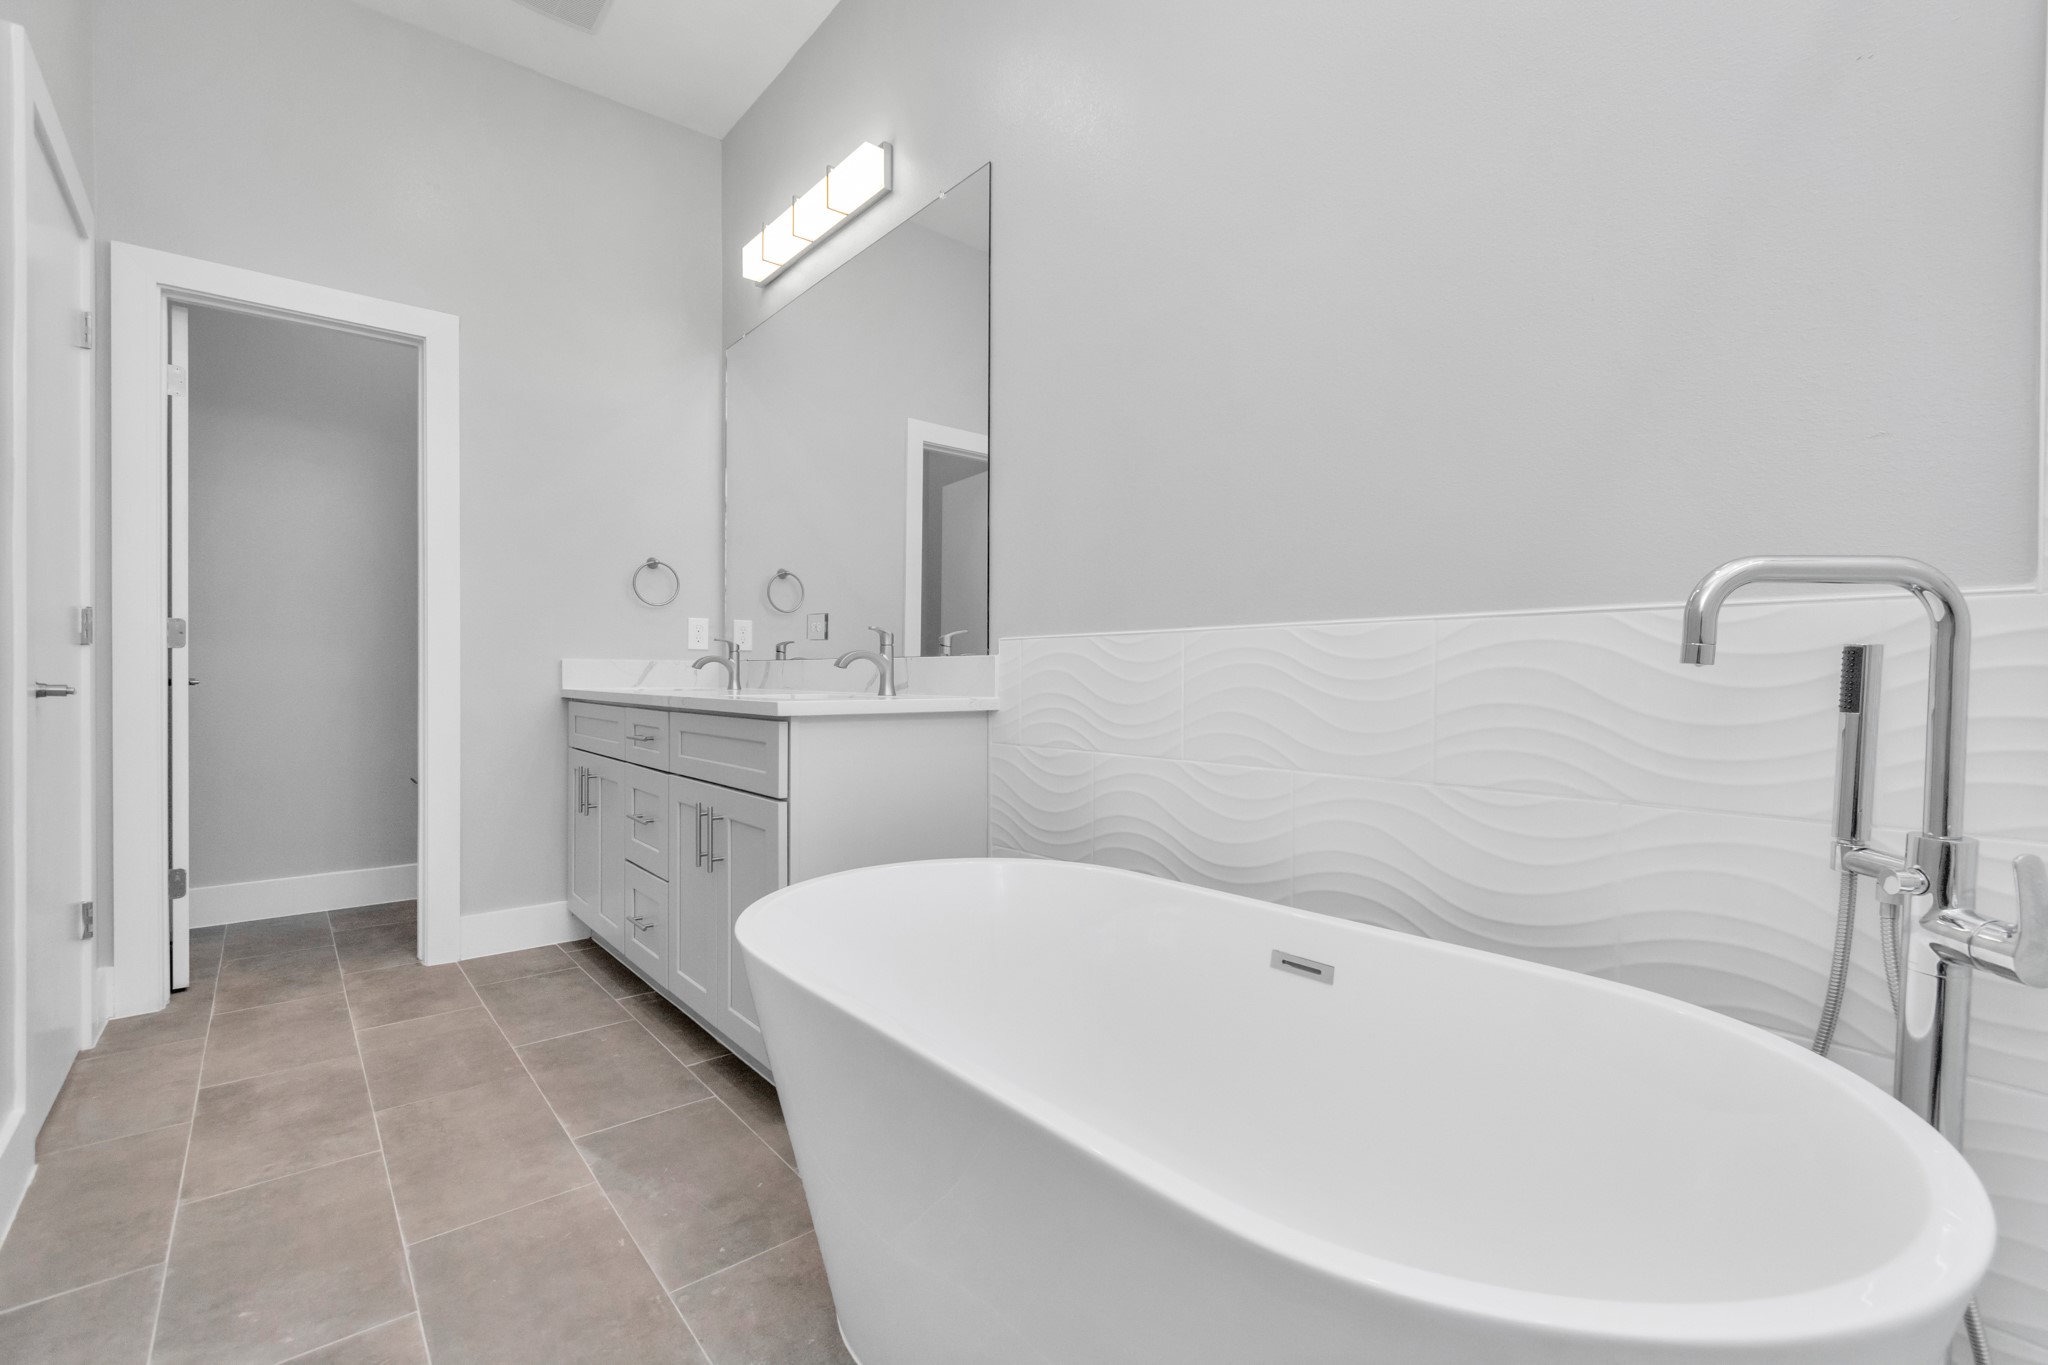 Styled with modern tile behind the tub and grandiose fixtures!